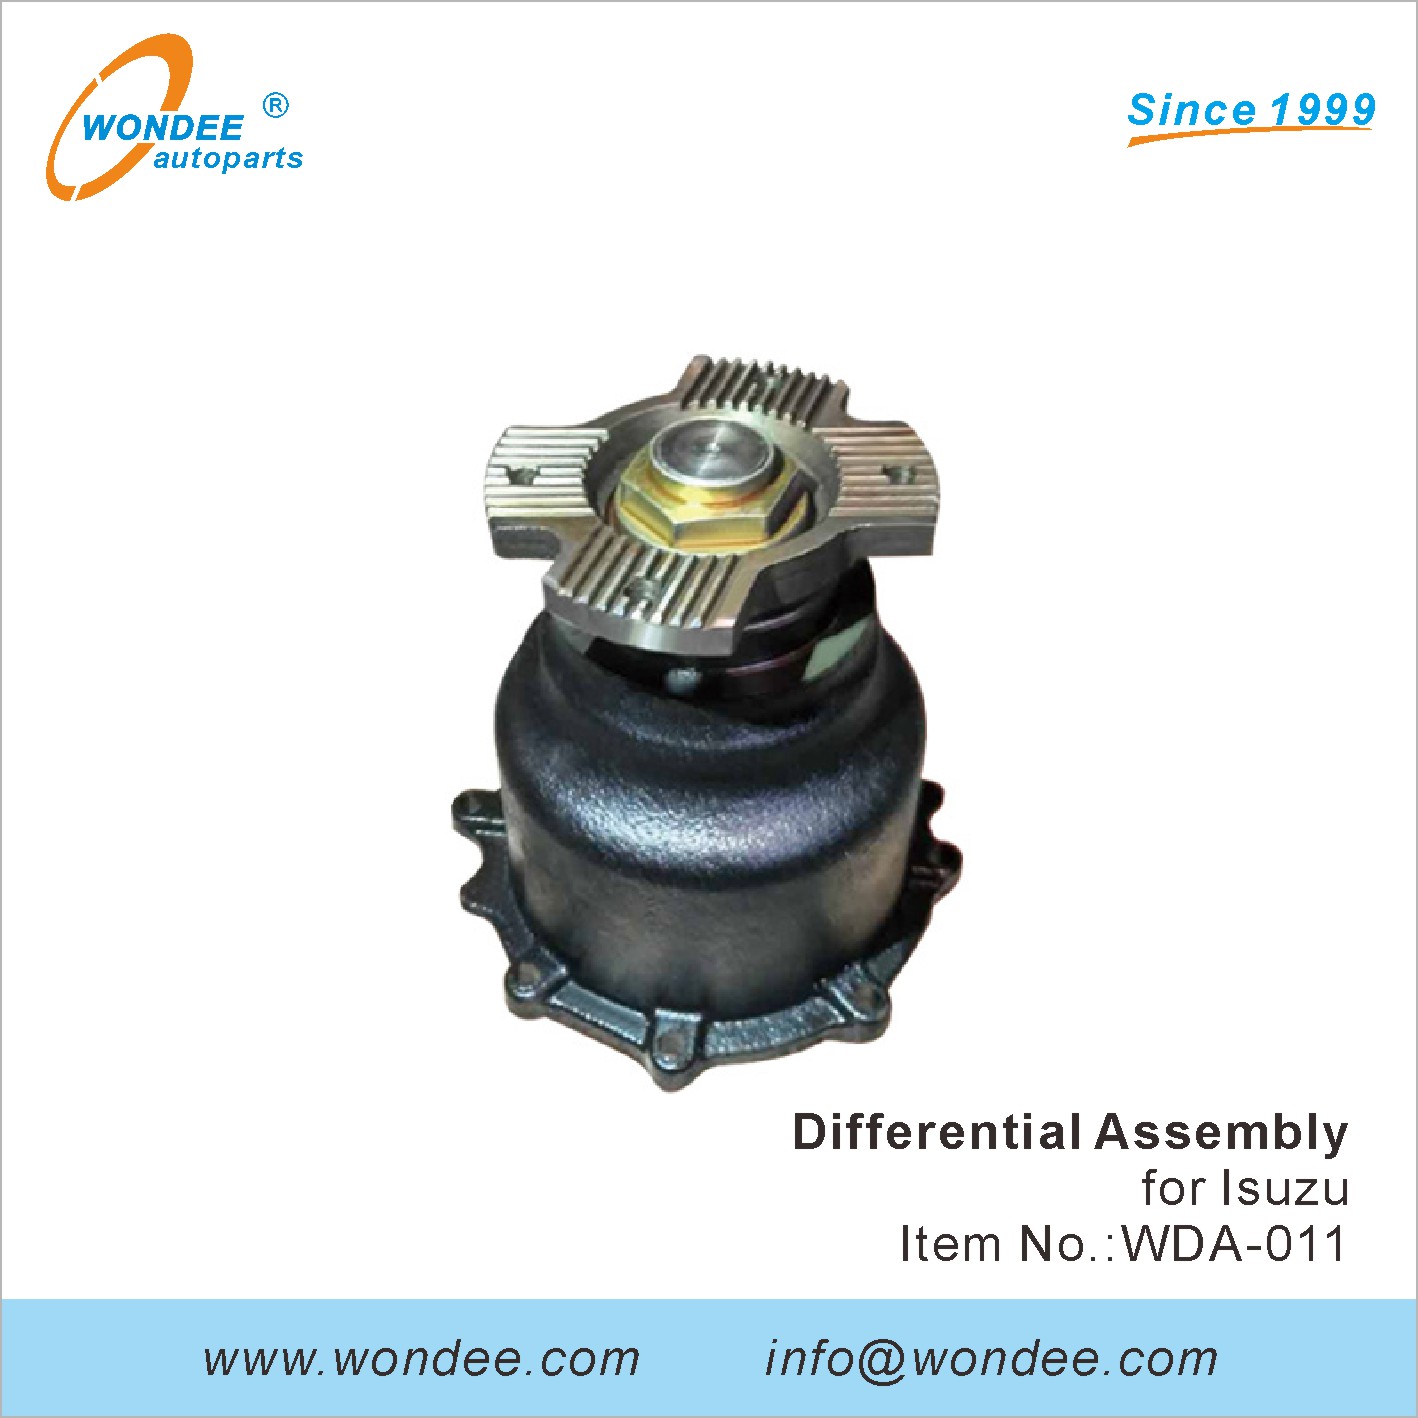 WONDEE differential assembly (11)